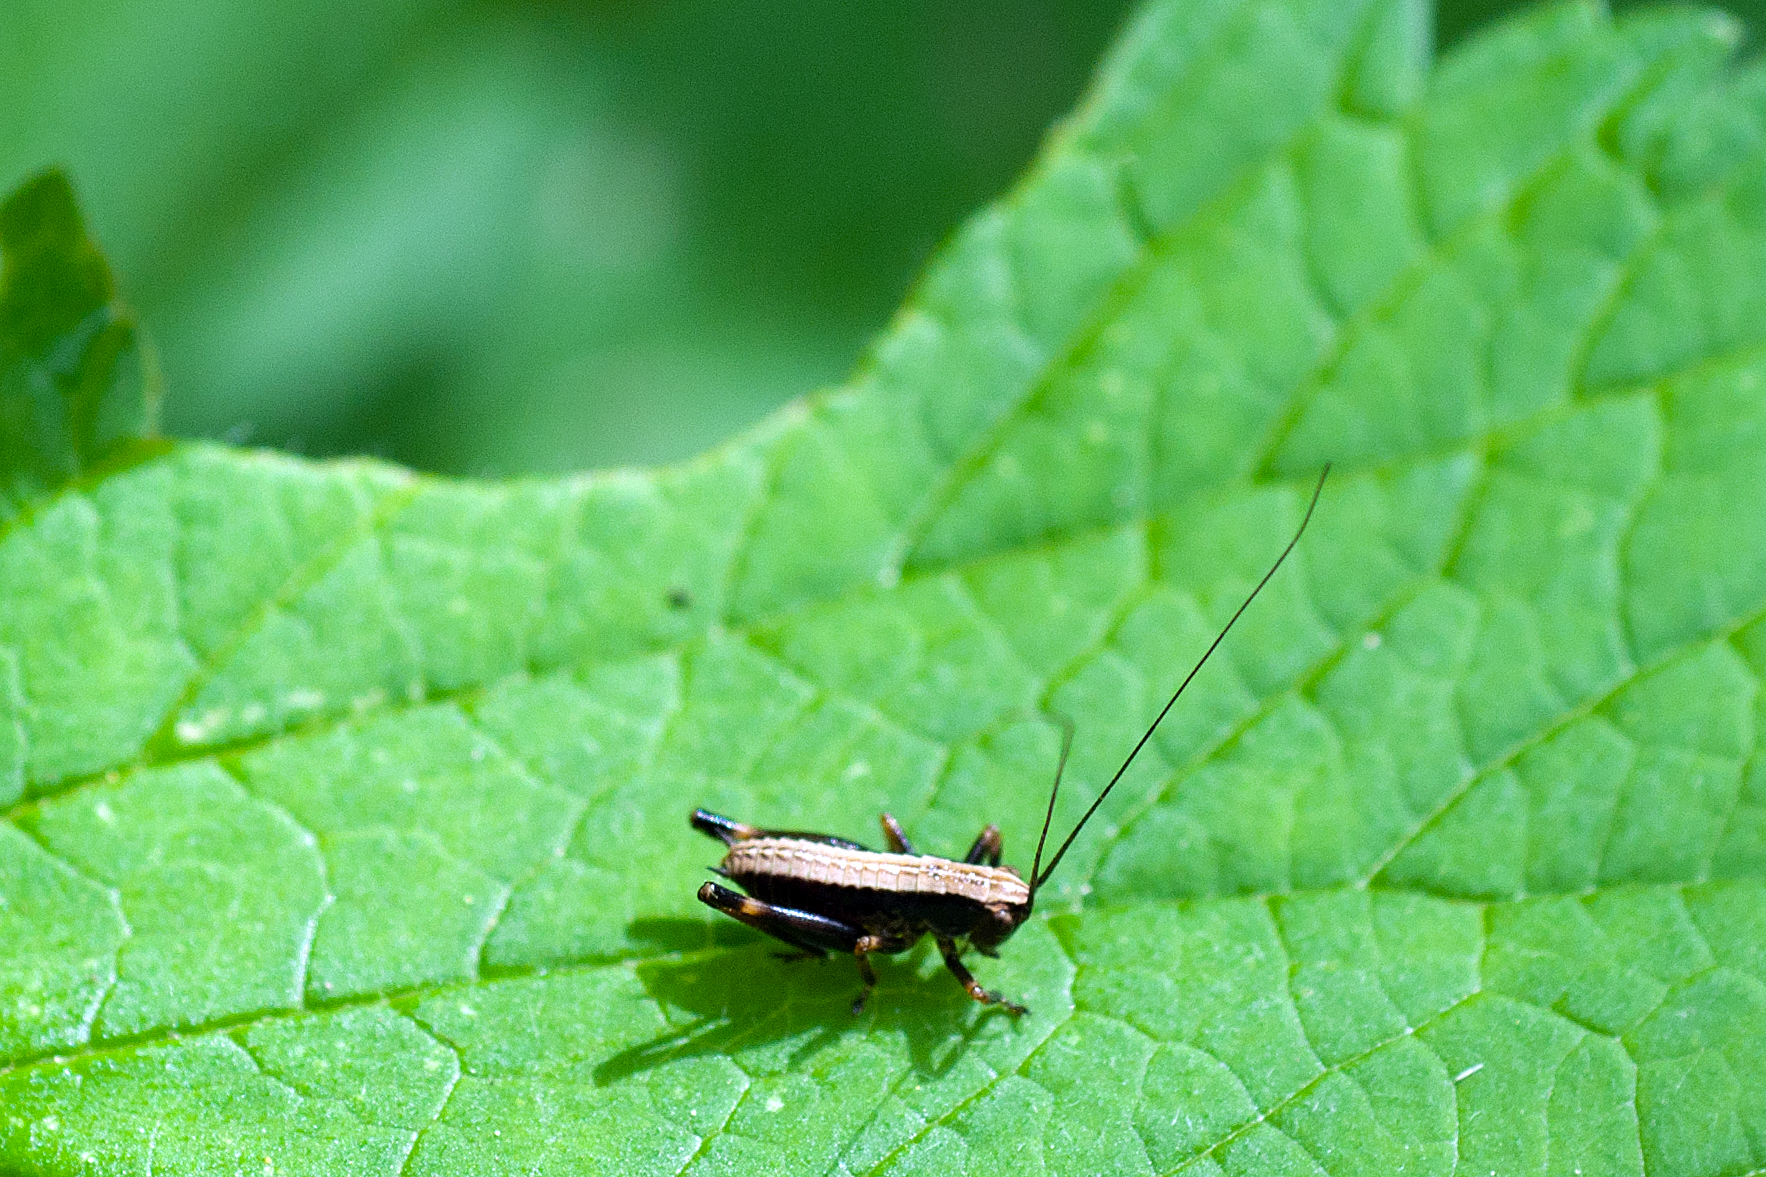 a bug is standing on the surface of a leaf